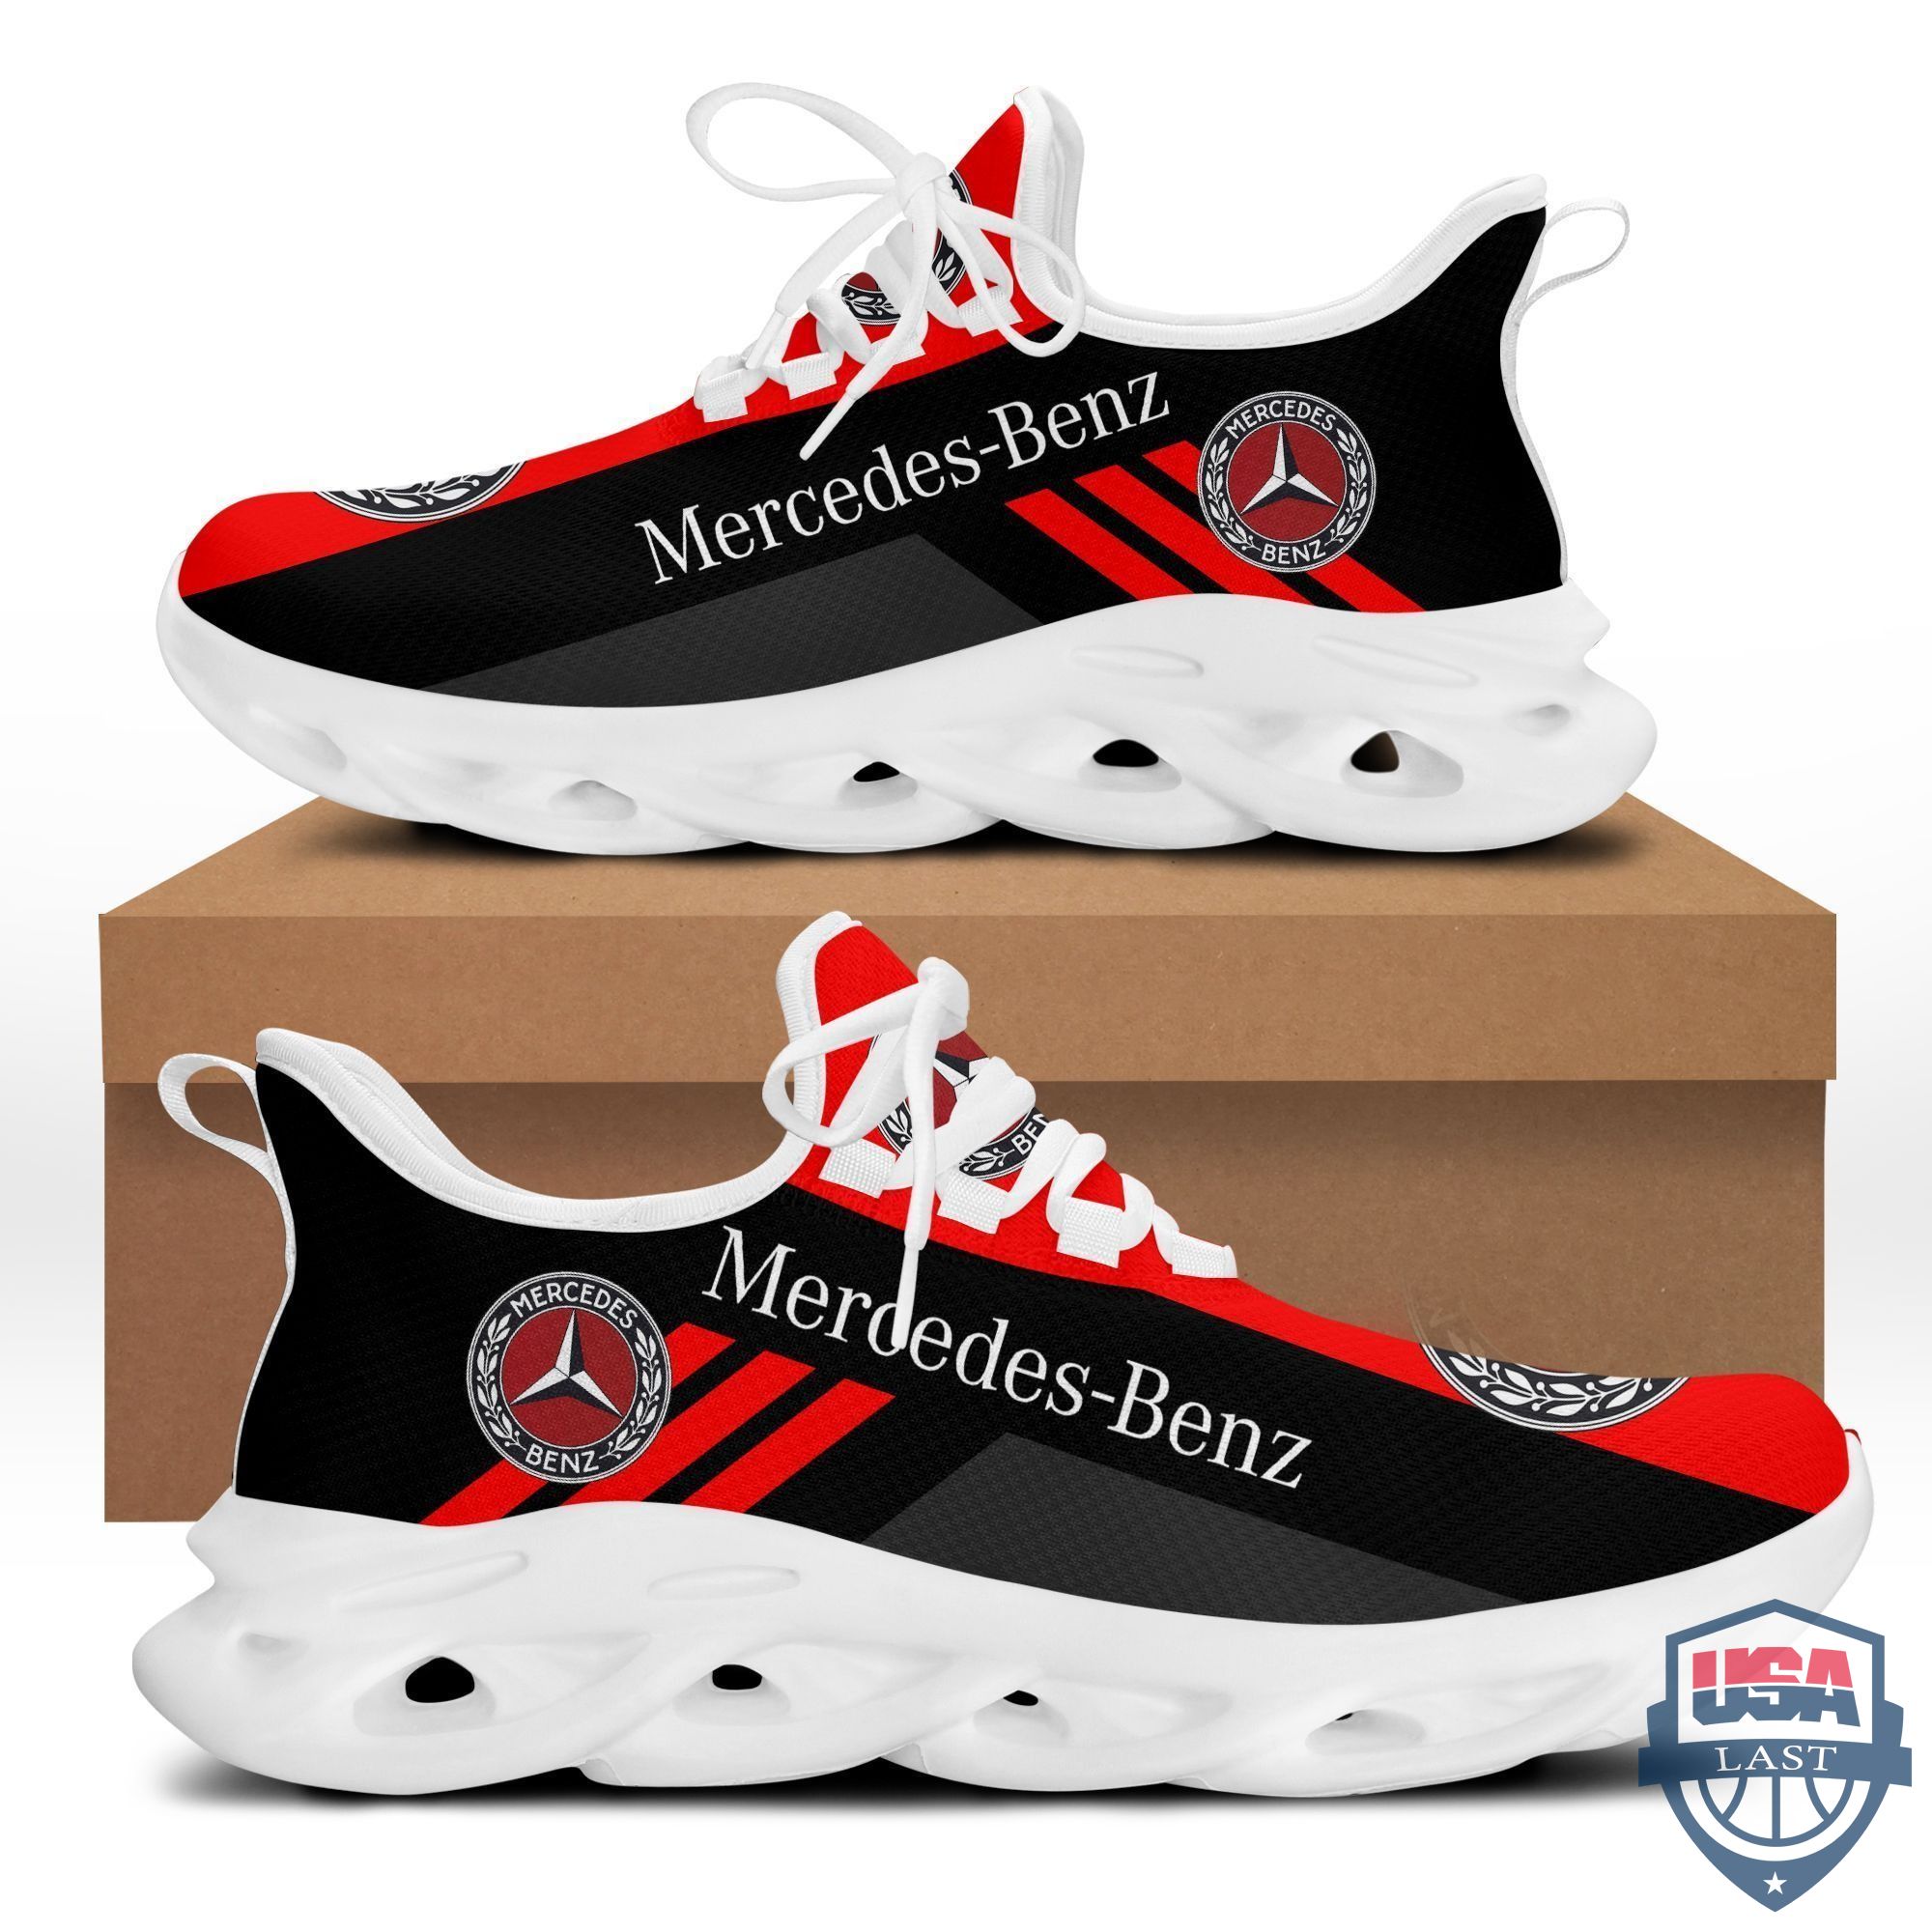 Top Trending – Mercedes Benz Amg Max Soul Shoes Red Version